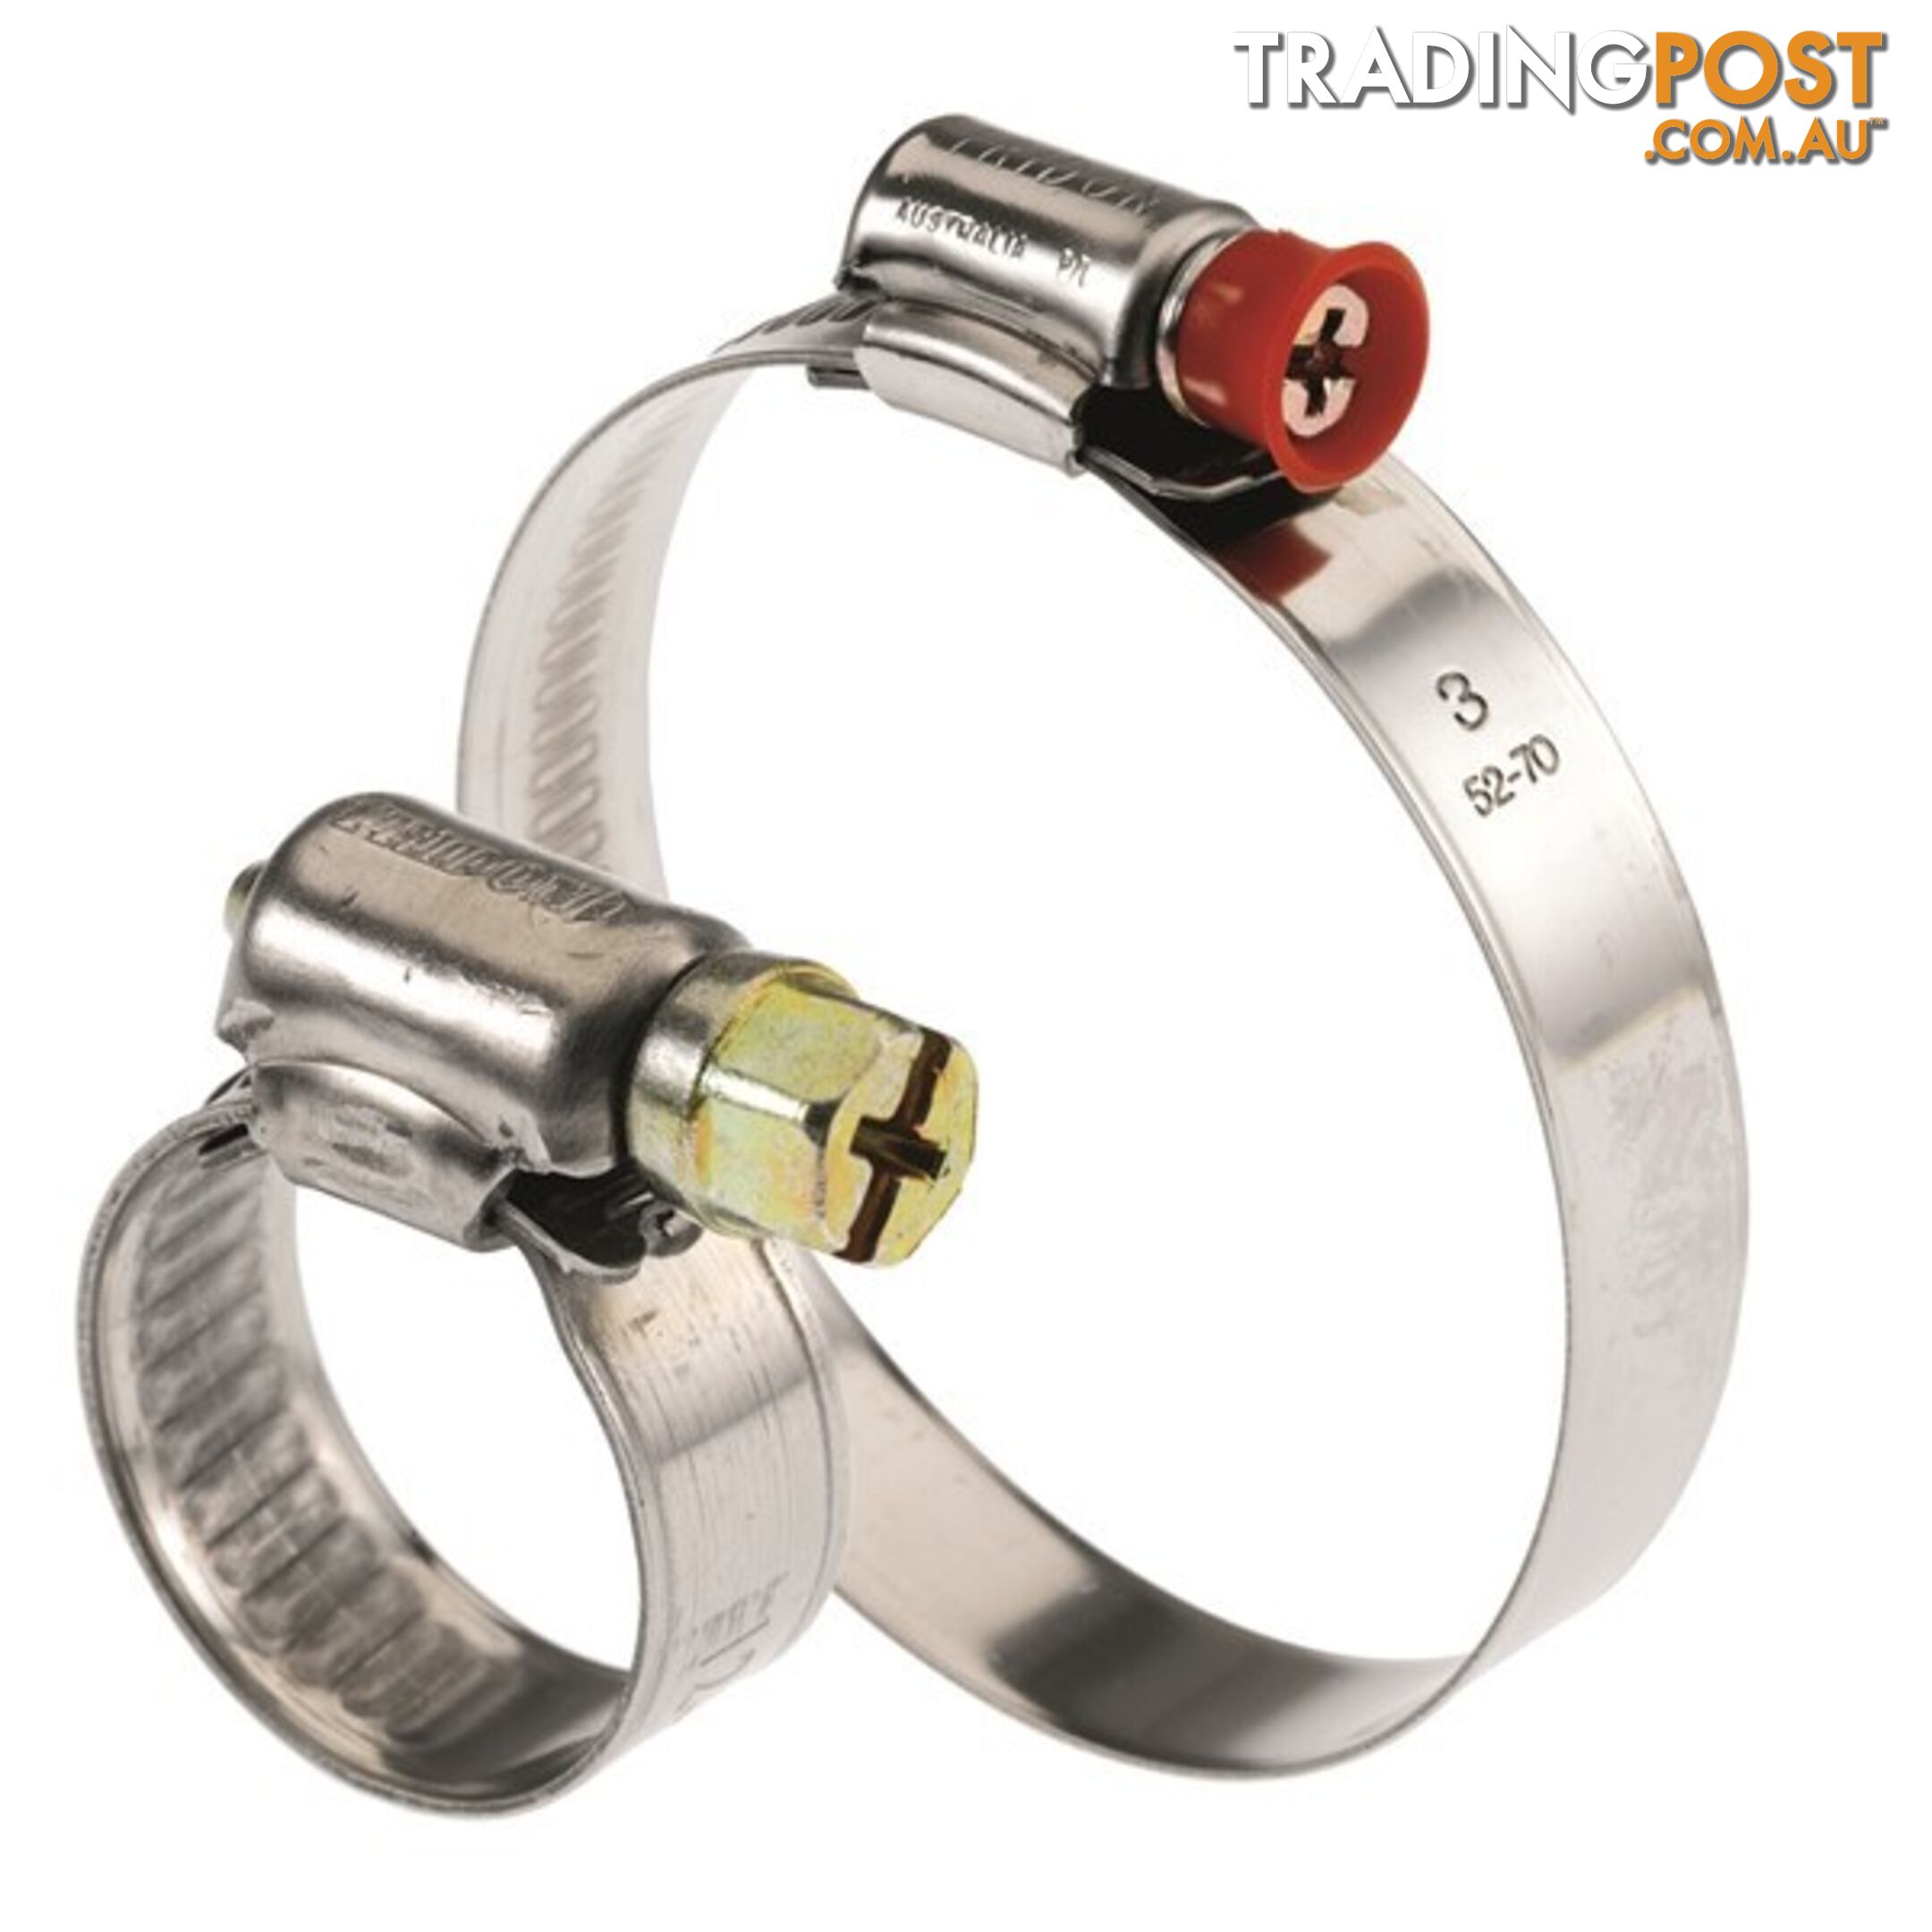 Tridon Part S.S Hose Clamp 255mm-280mm Multi Purpose Solid Micro Band 10pk SKU - MP12